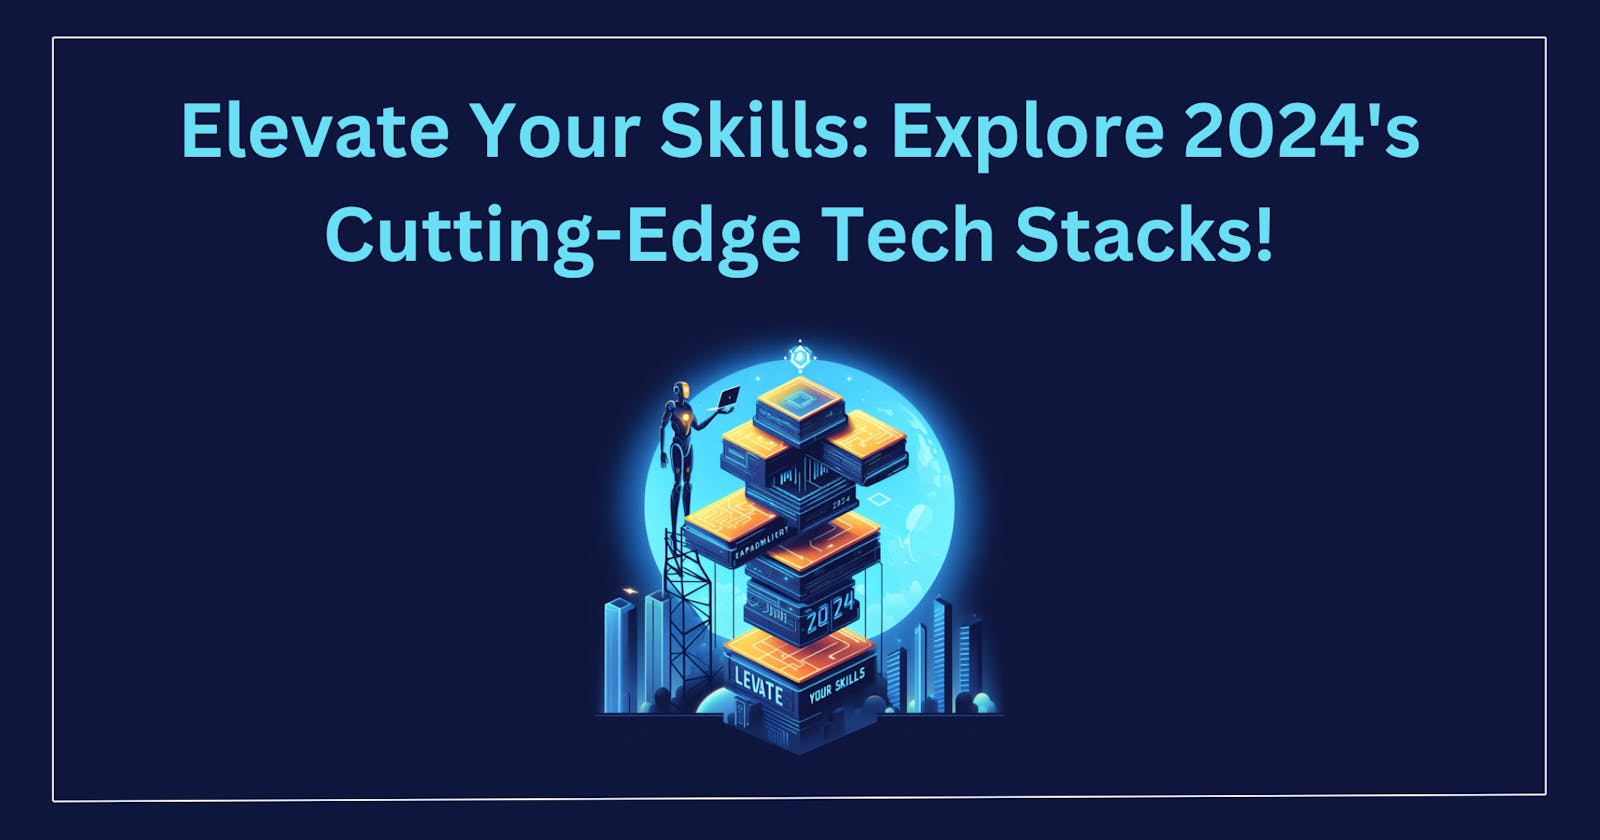 Elevate Your Skills: Explore 2024's Cutting-Edge Tech Stacks!